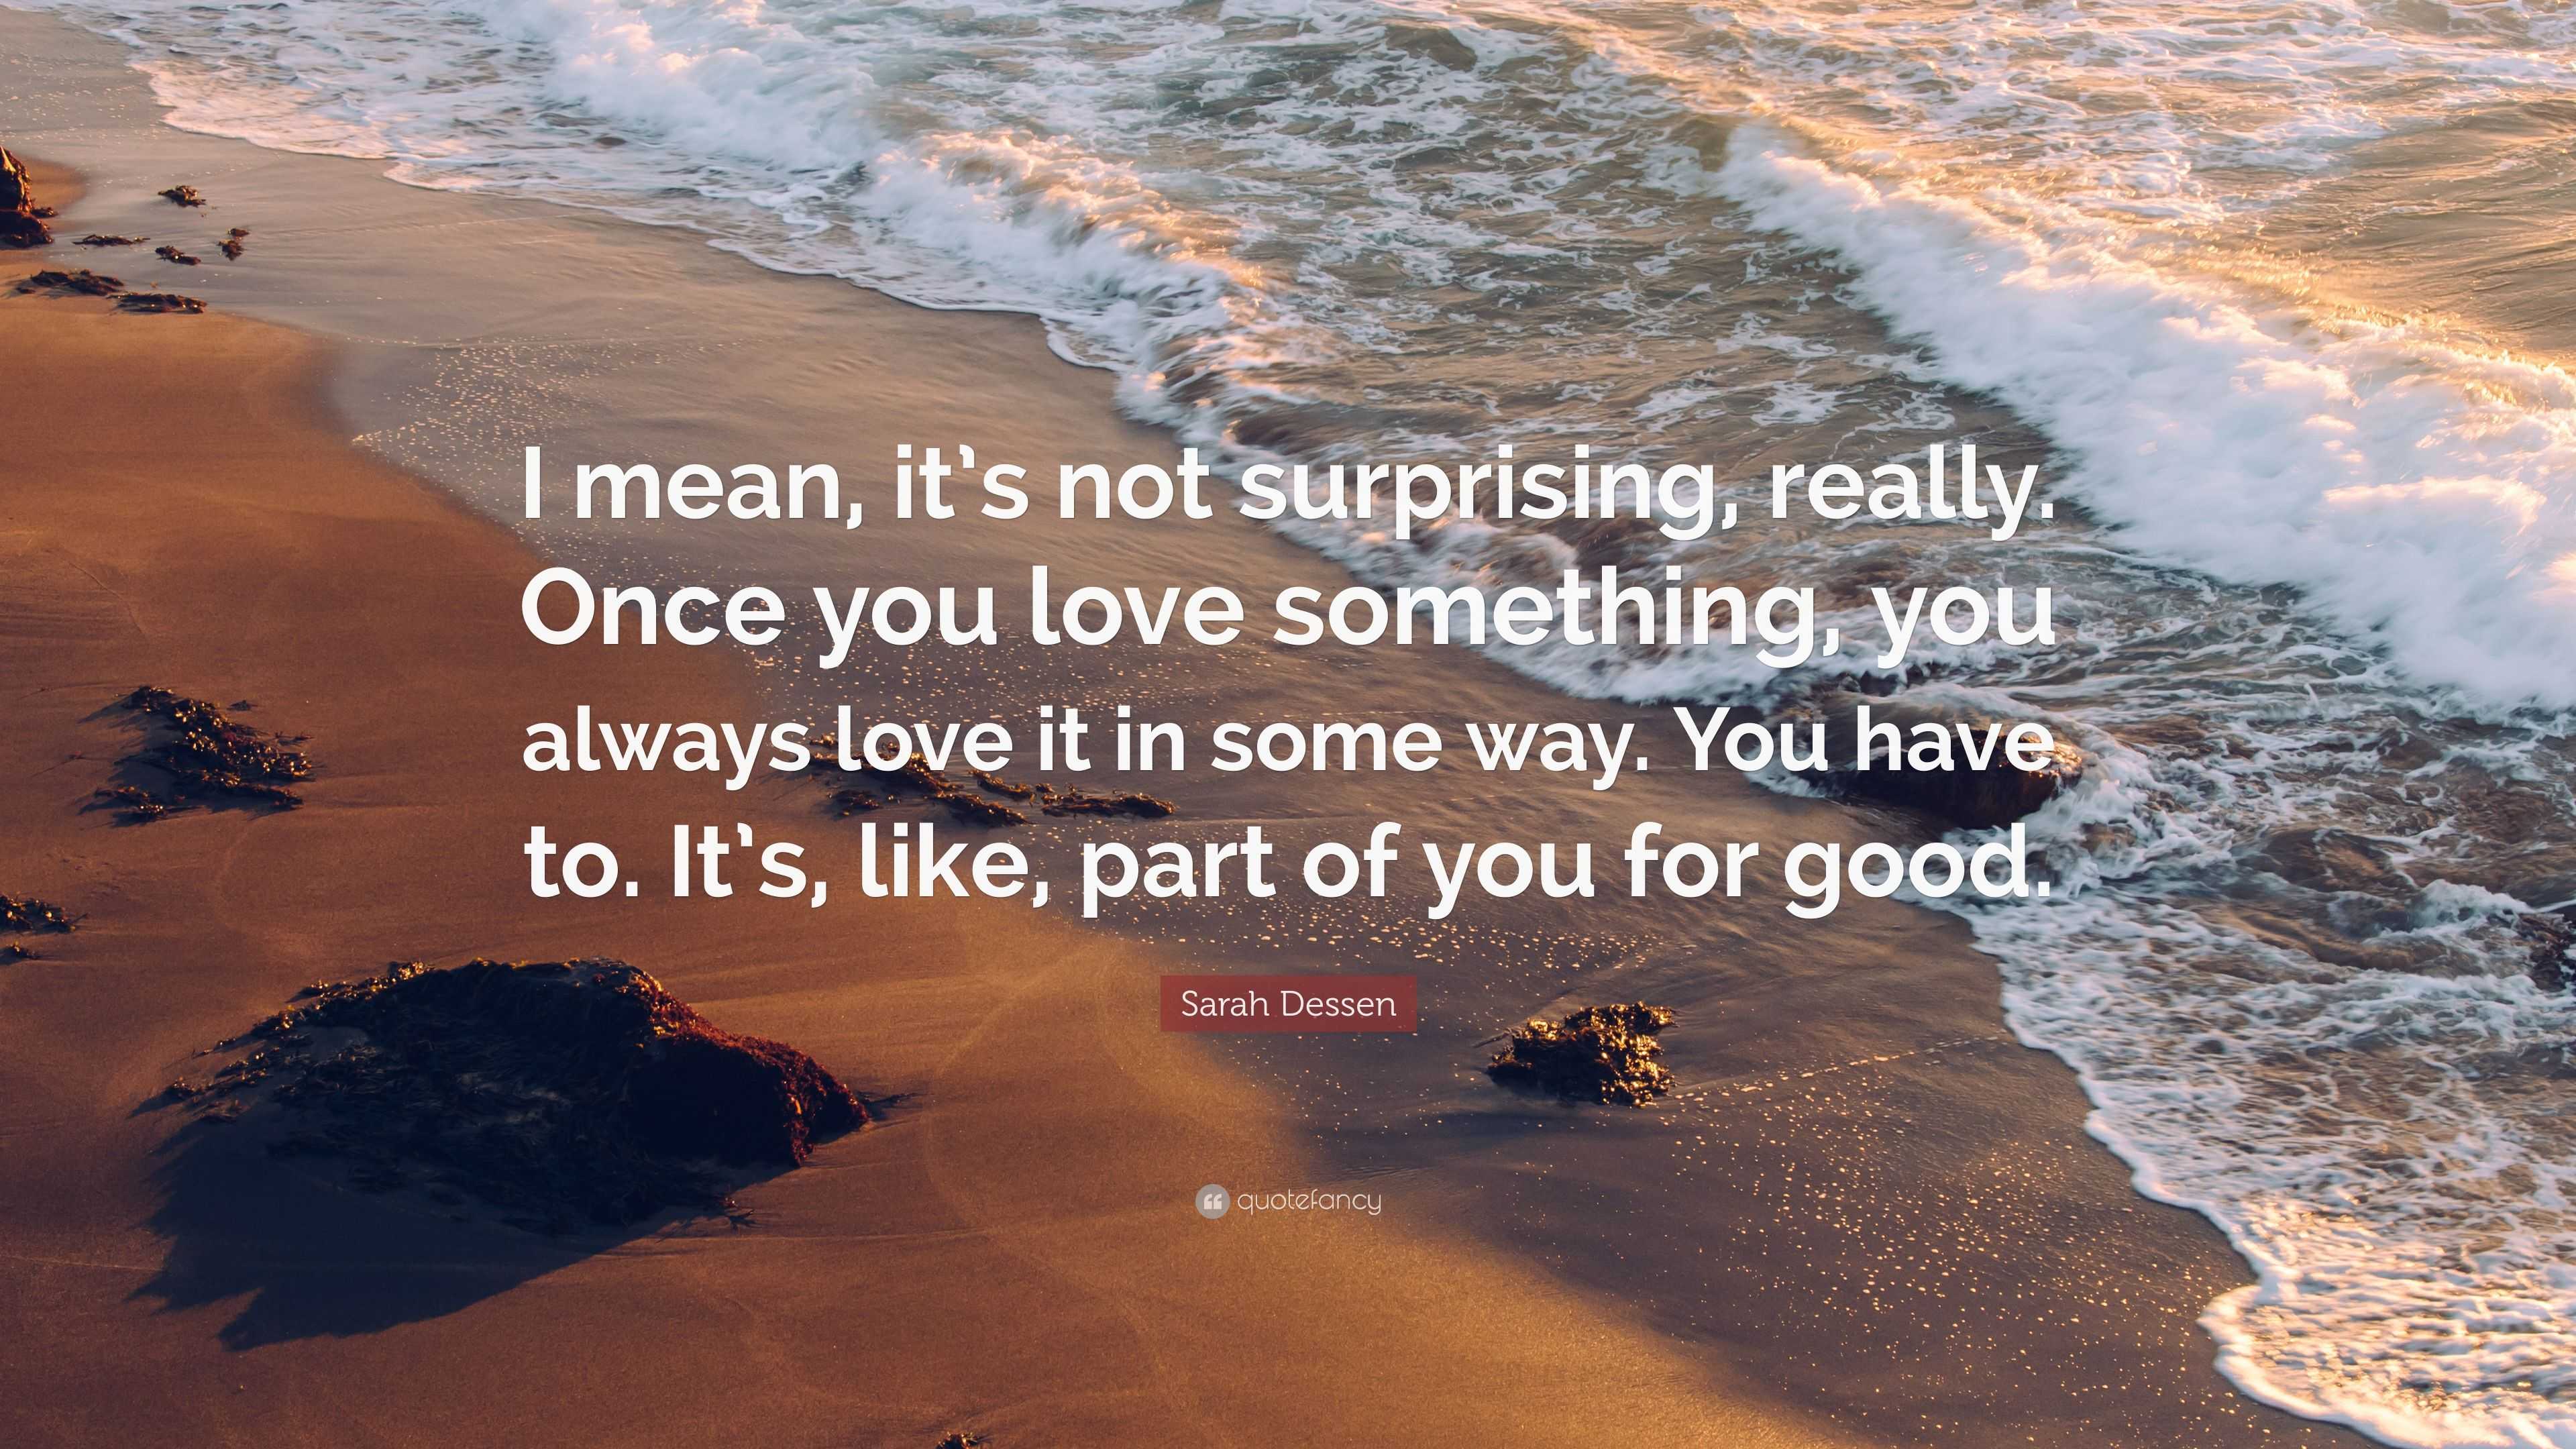 Sarah Dessen Quote: “I mean, it’s not surprising, really. Once you love ...